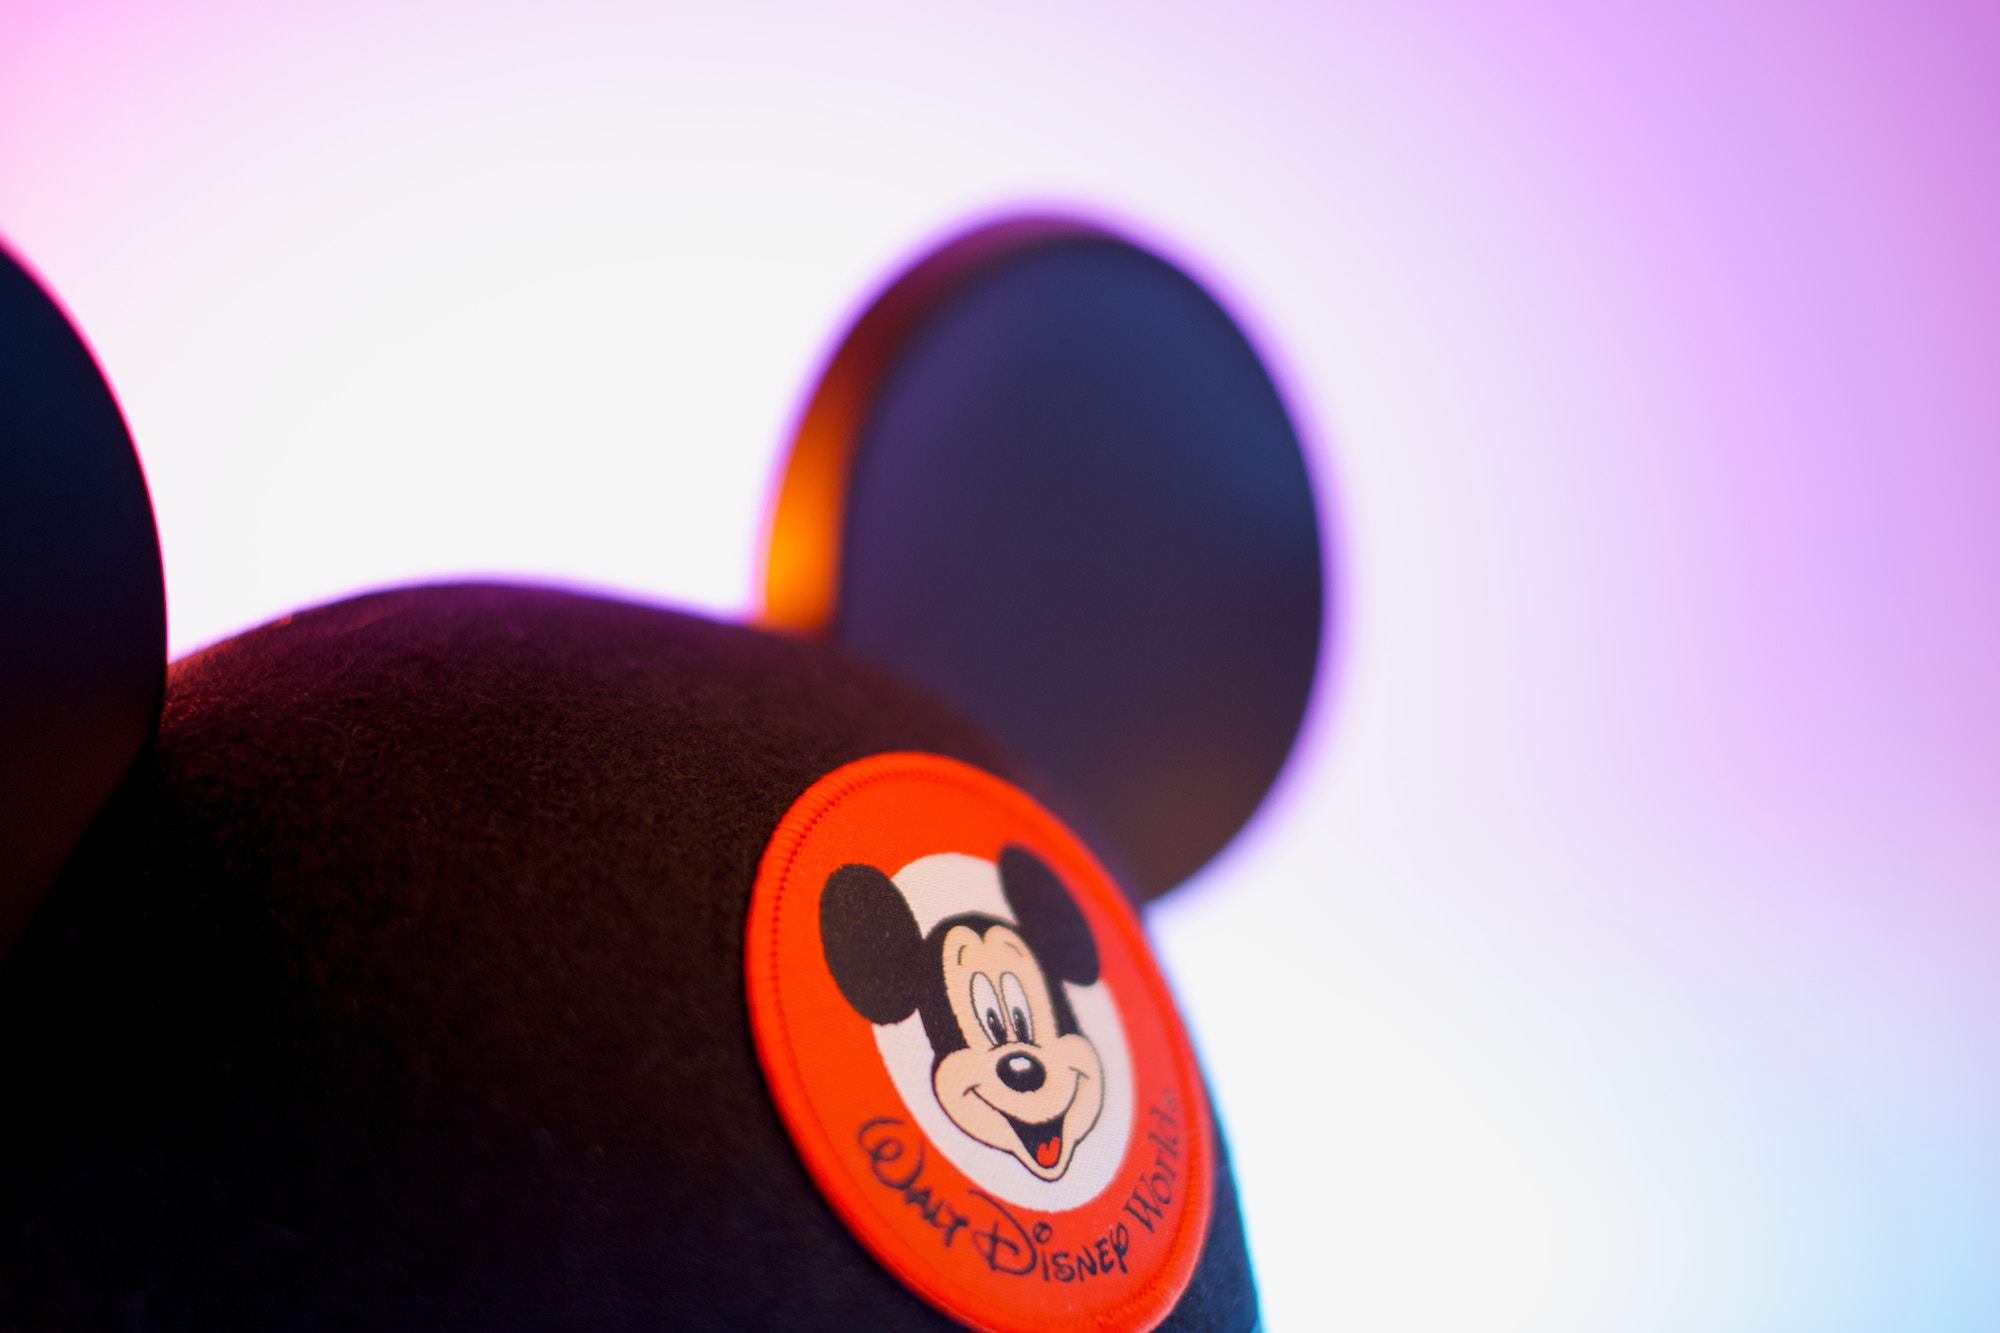 Wonderinterest | Walt Disney has expired the rights to the Mickey Mouse character. What will be the impact on the value of the company?